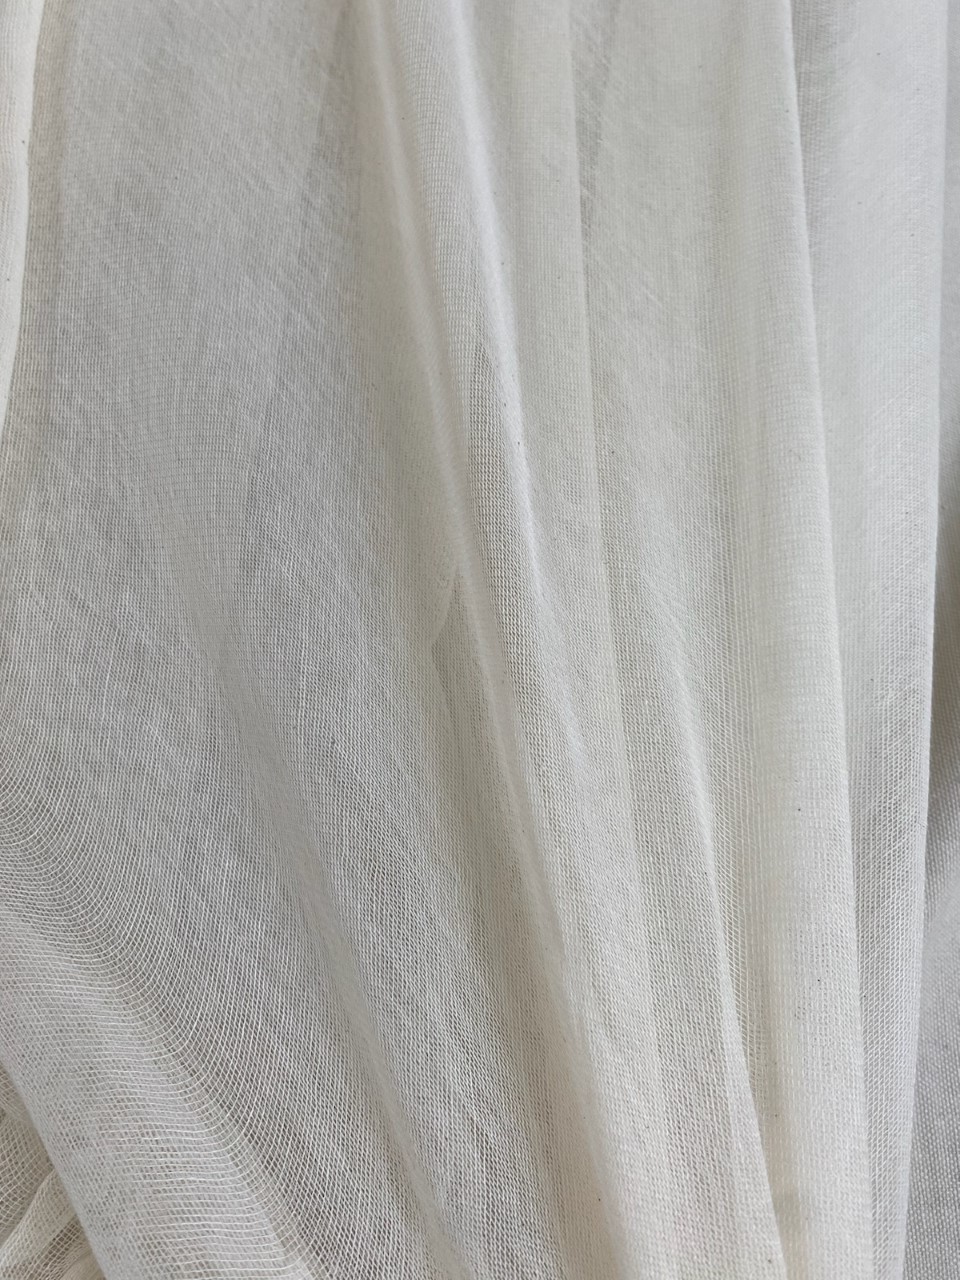 87" Wide Grade 40 Natural Cheesecloth 2 Yards - Click Image to Close